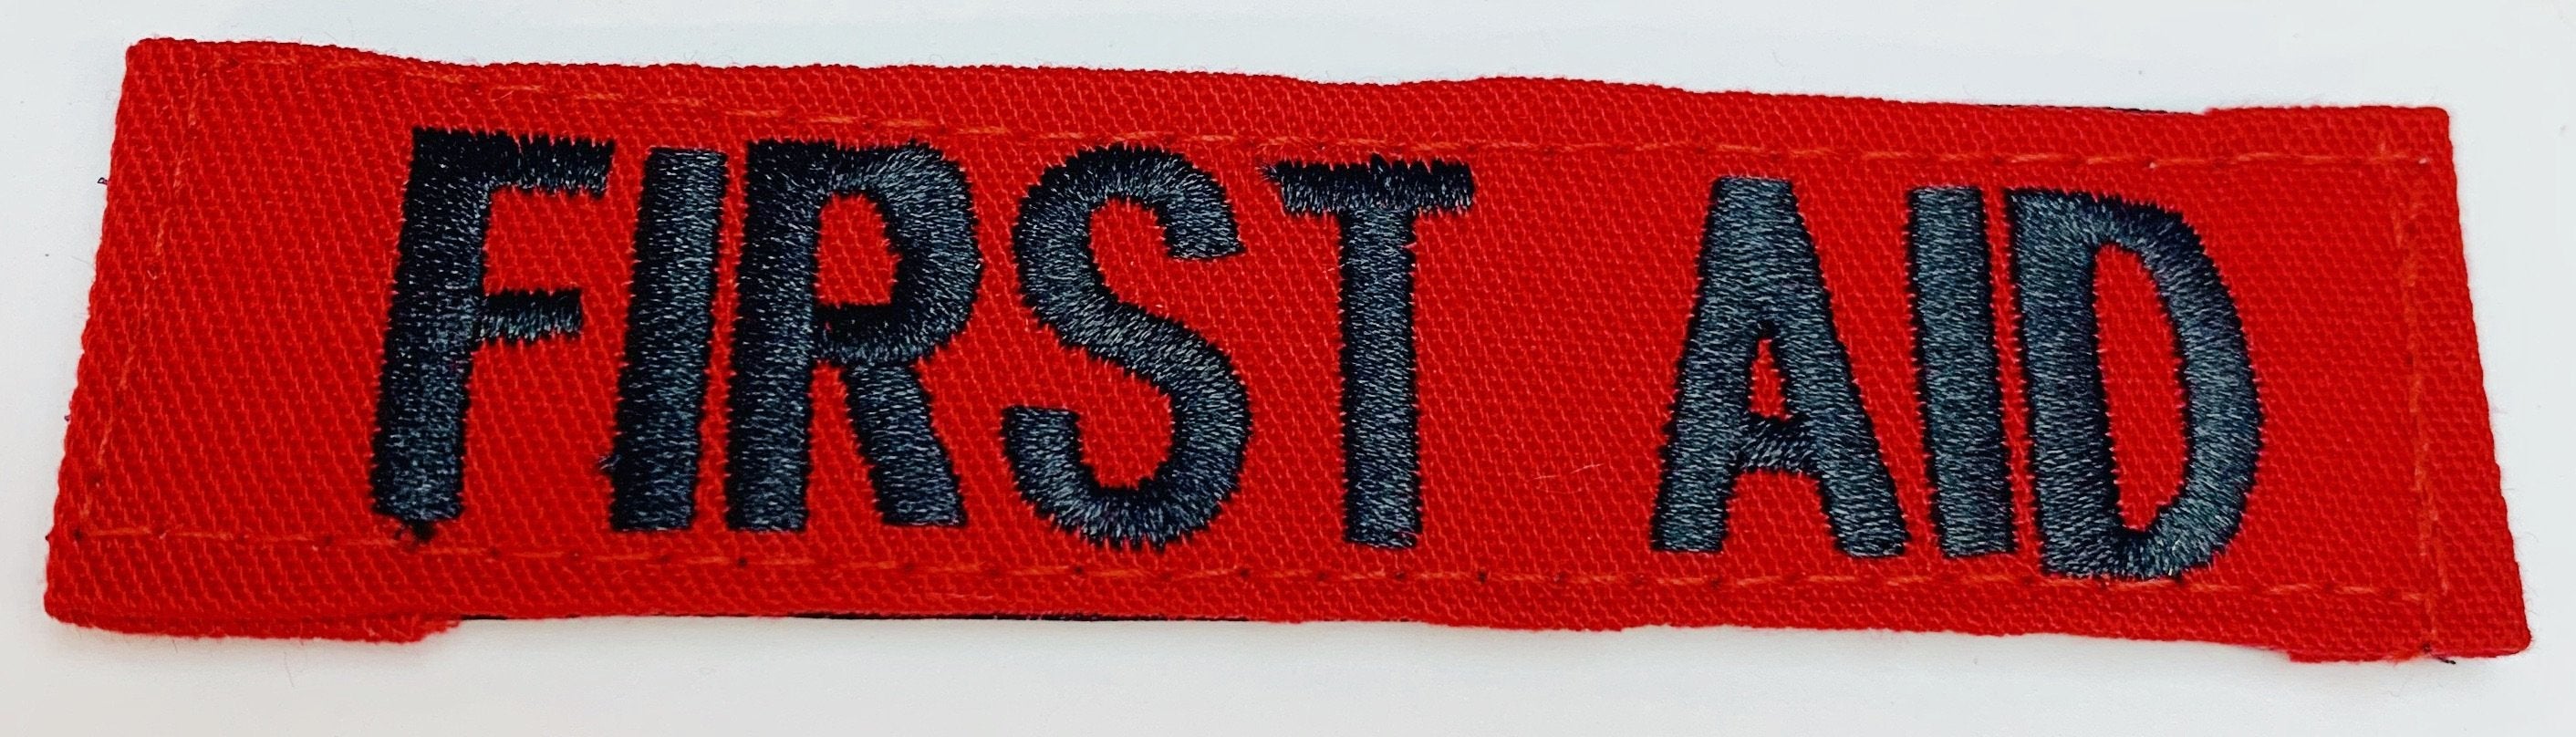 First Aid Patch, Medical Gear Outfitters